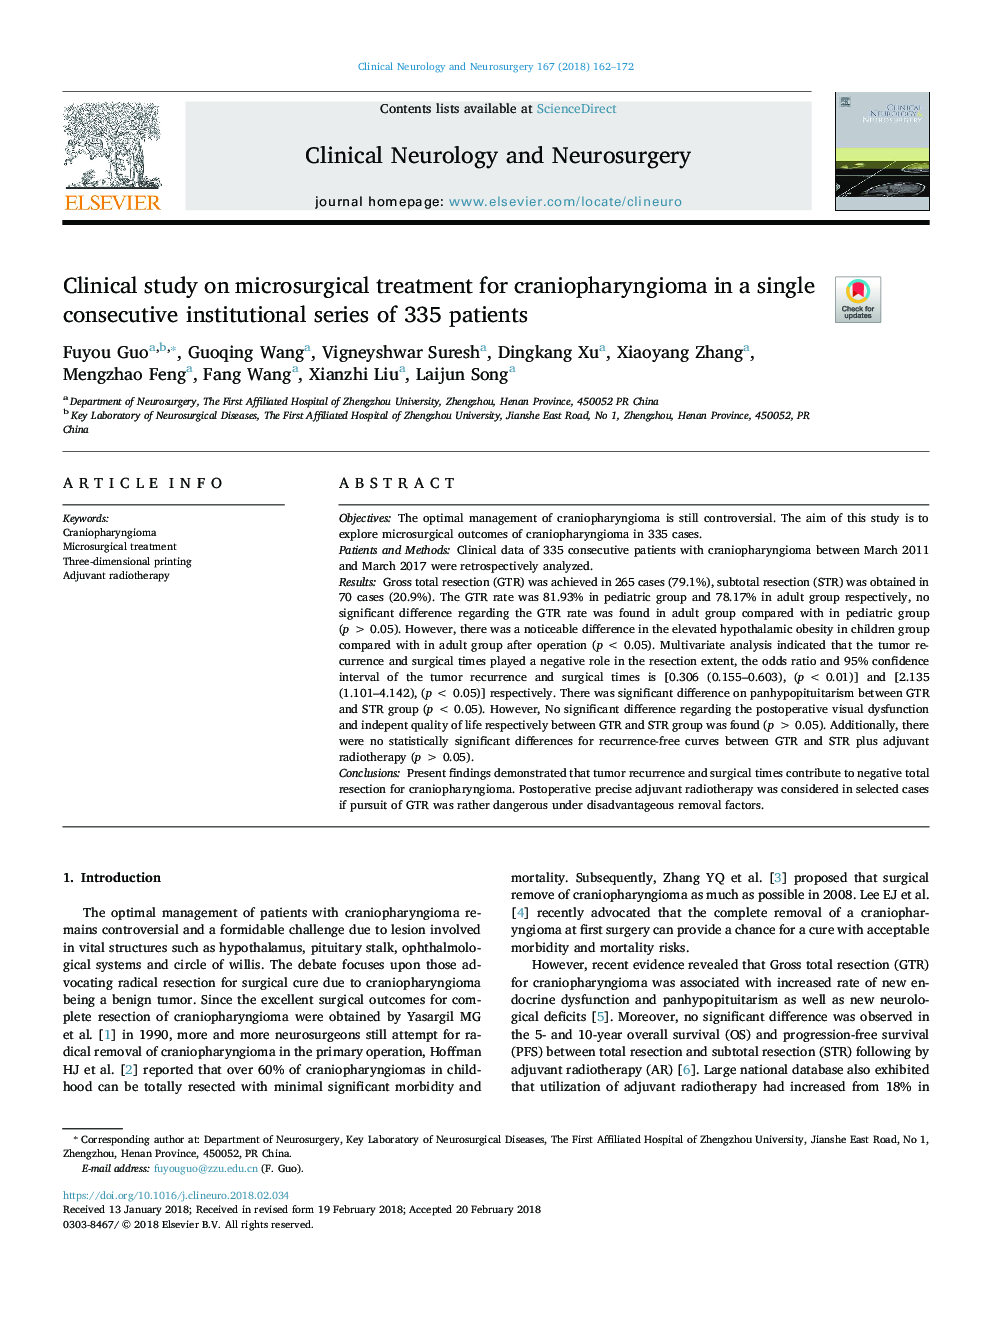 Clinical study on microsurgical treatment for craniopharyngioma in a single consecutive institutional series of 335 patients